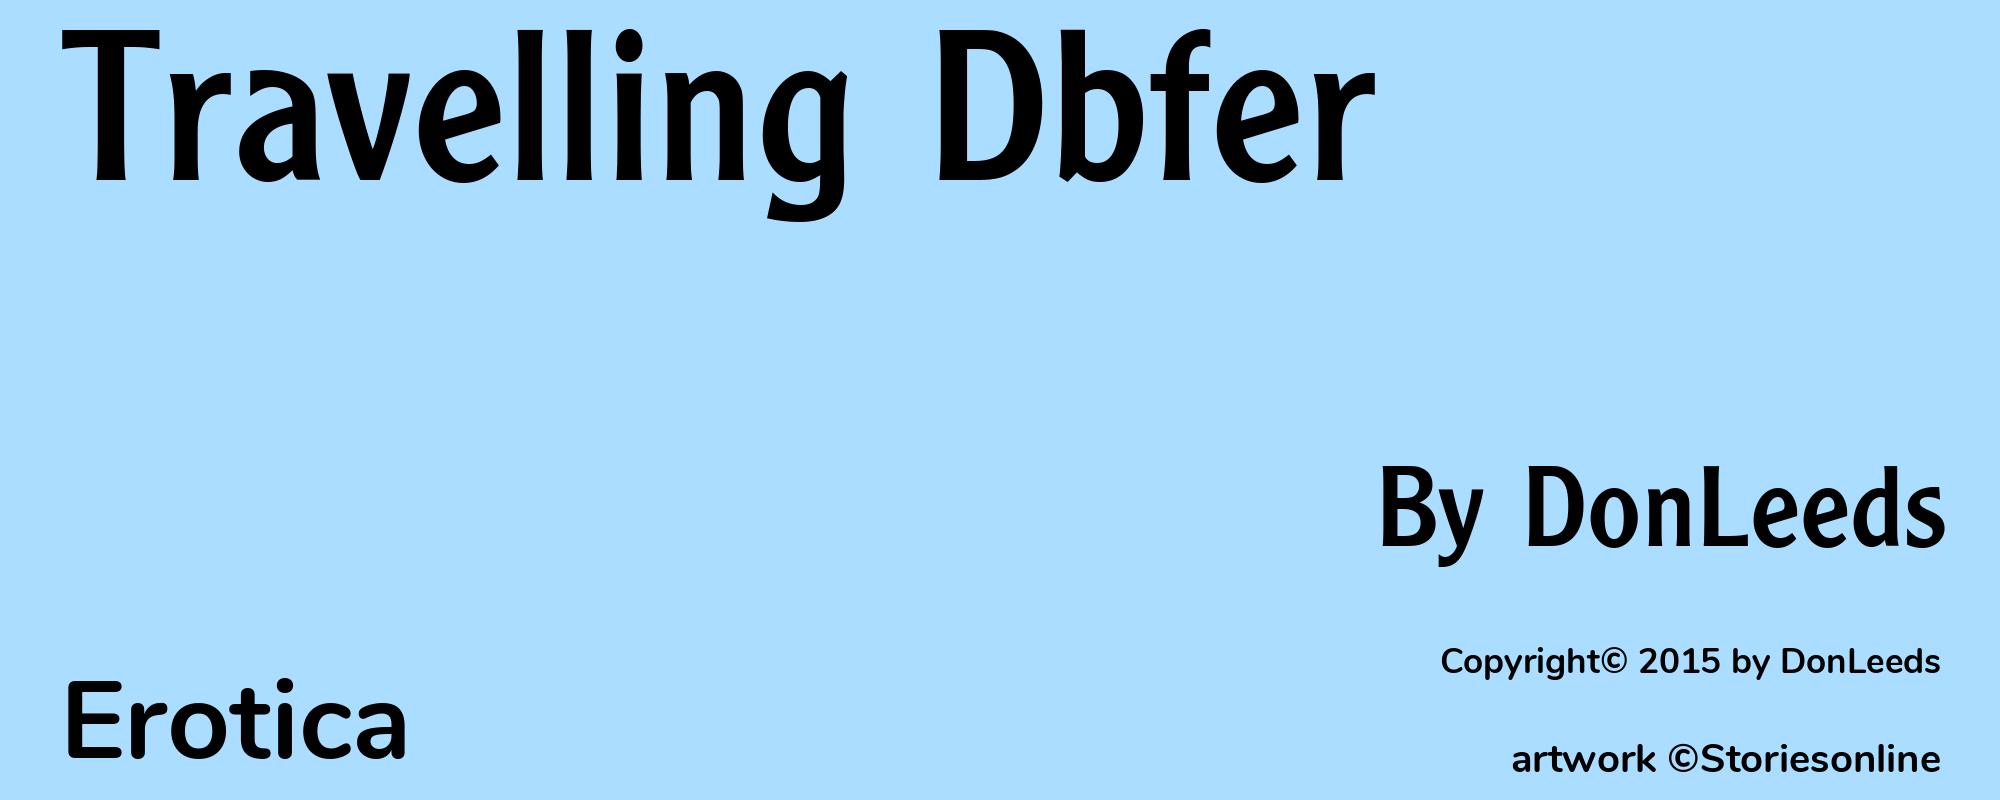 Travelling Dbfer - Cover